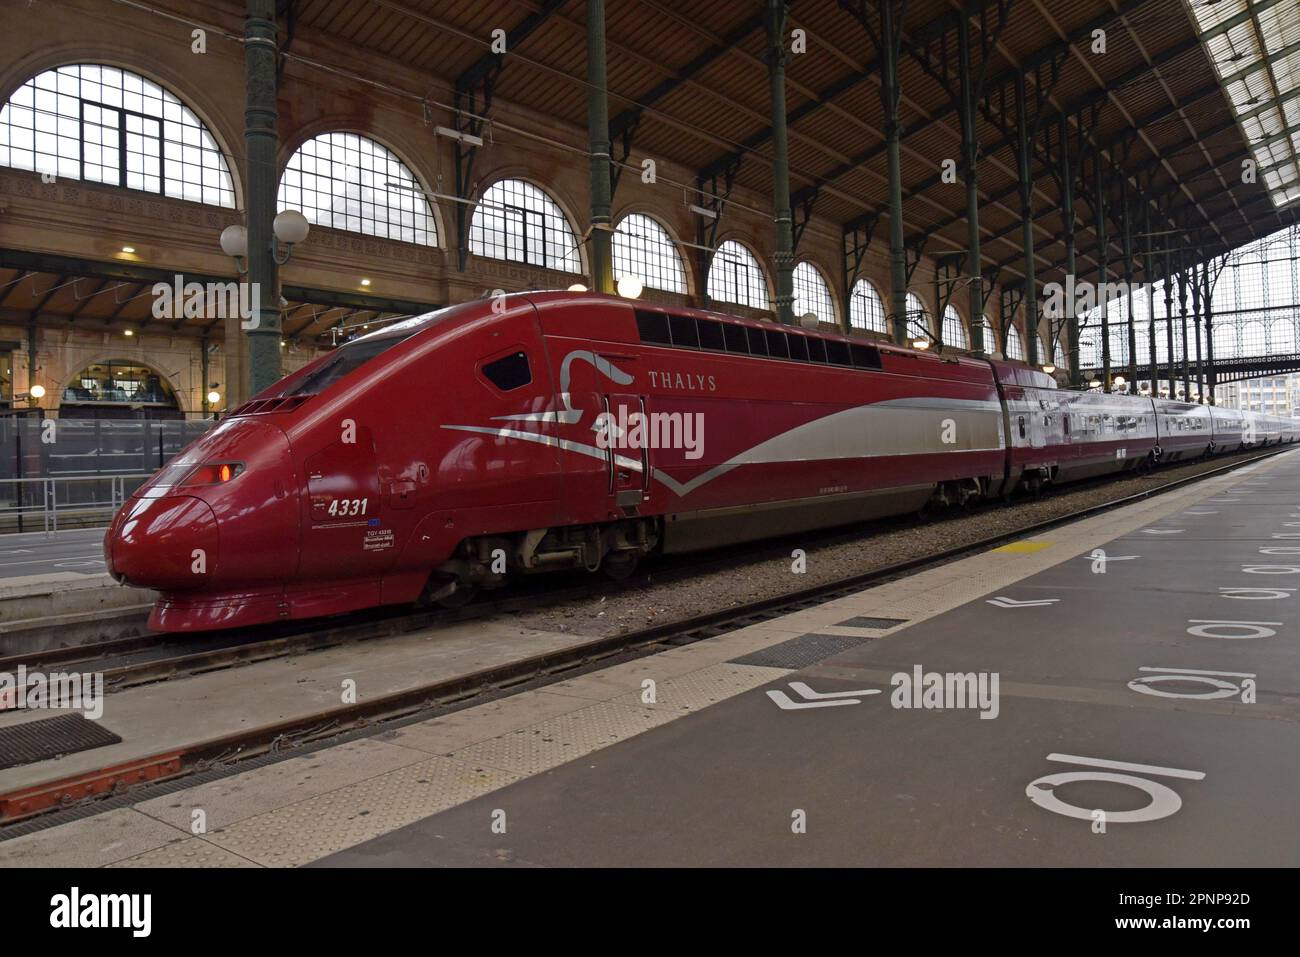 Thalys high speed train at Gare Du Nord railway station, Paris, France Stock Photo